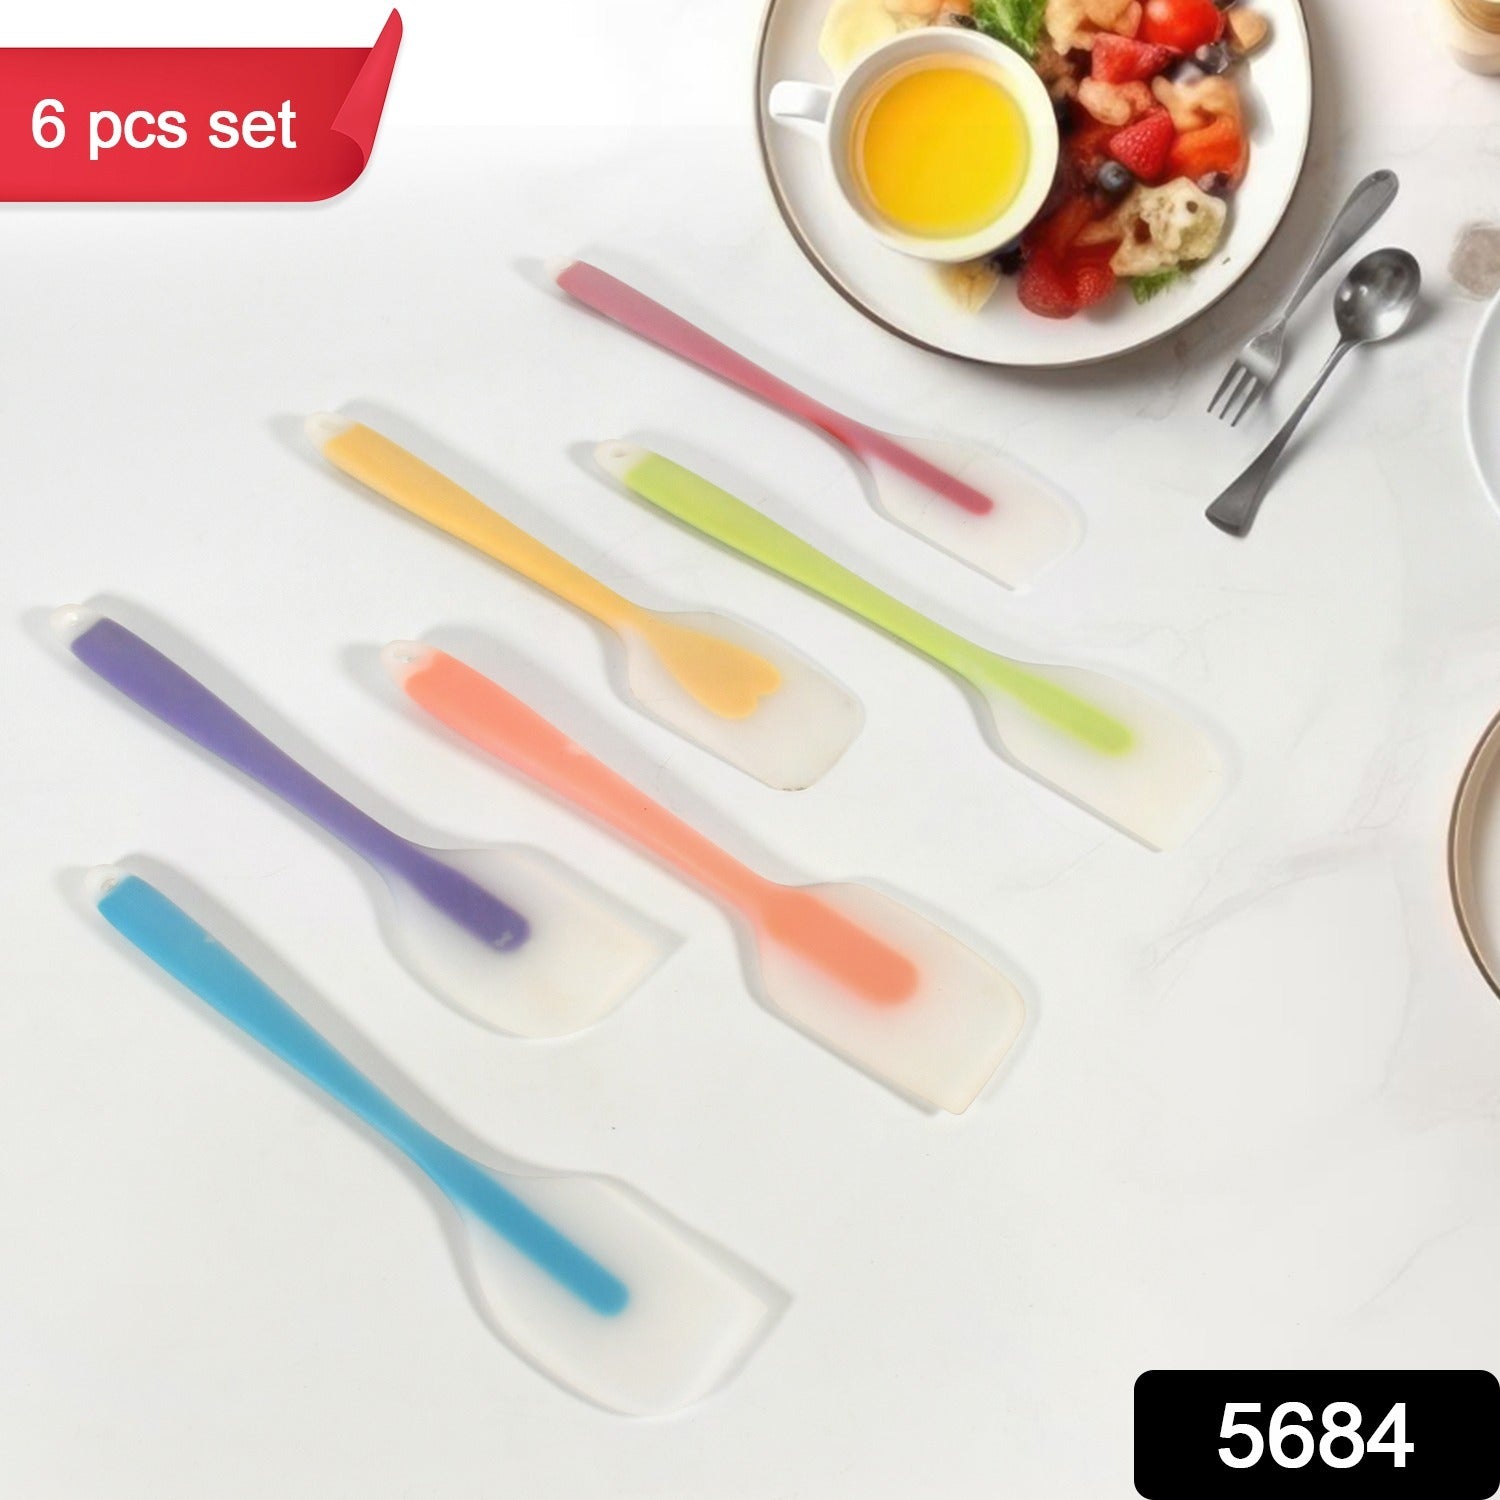 5684 Multipurpose Silicone Spoon, Silicone Basting Spoon Non-Stick Kitchen Utensils Household Gadgets Heat-Resistant Non Stick Spoons Kitchen Cookware Items For Cooking and Baking (6 Pcs Set / 28 Cm)